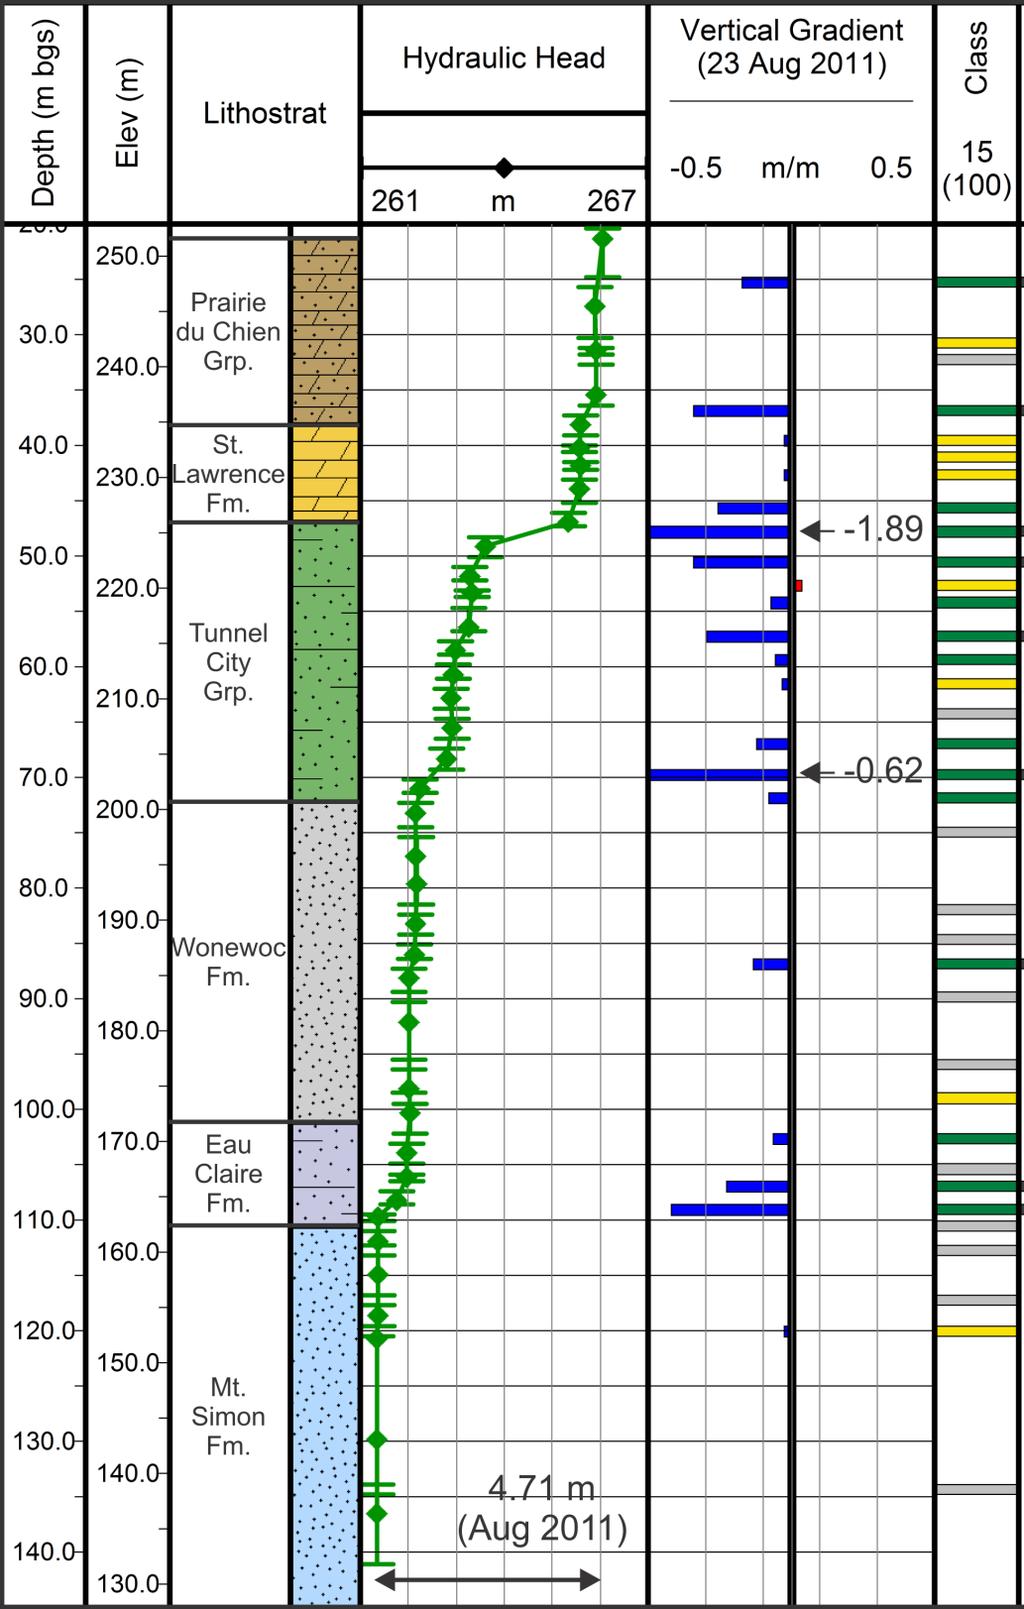 Comparison to Lithostratigraphy Relatively low K v Relatively high K v Lithostratigraphy is